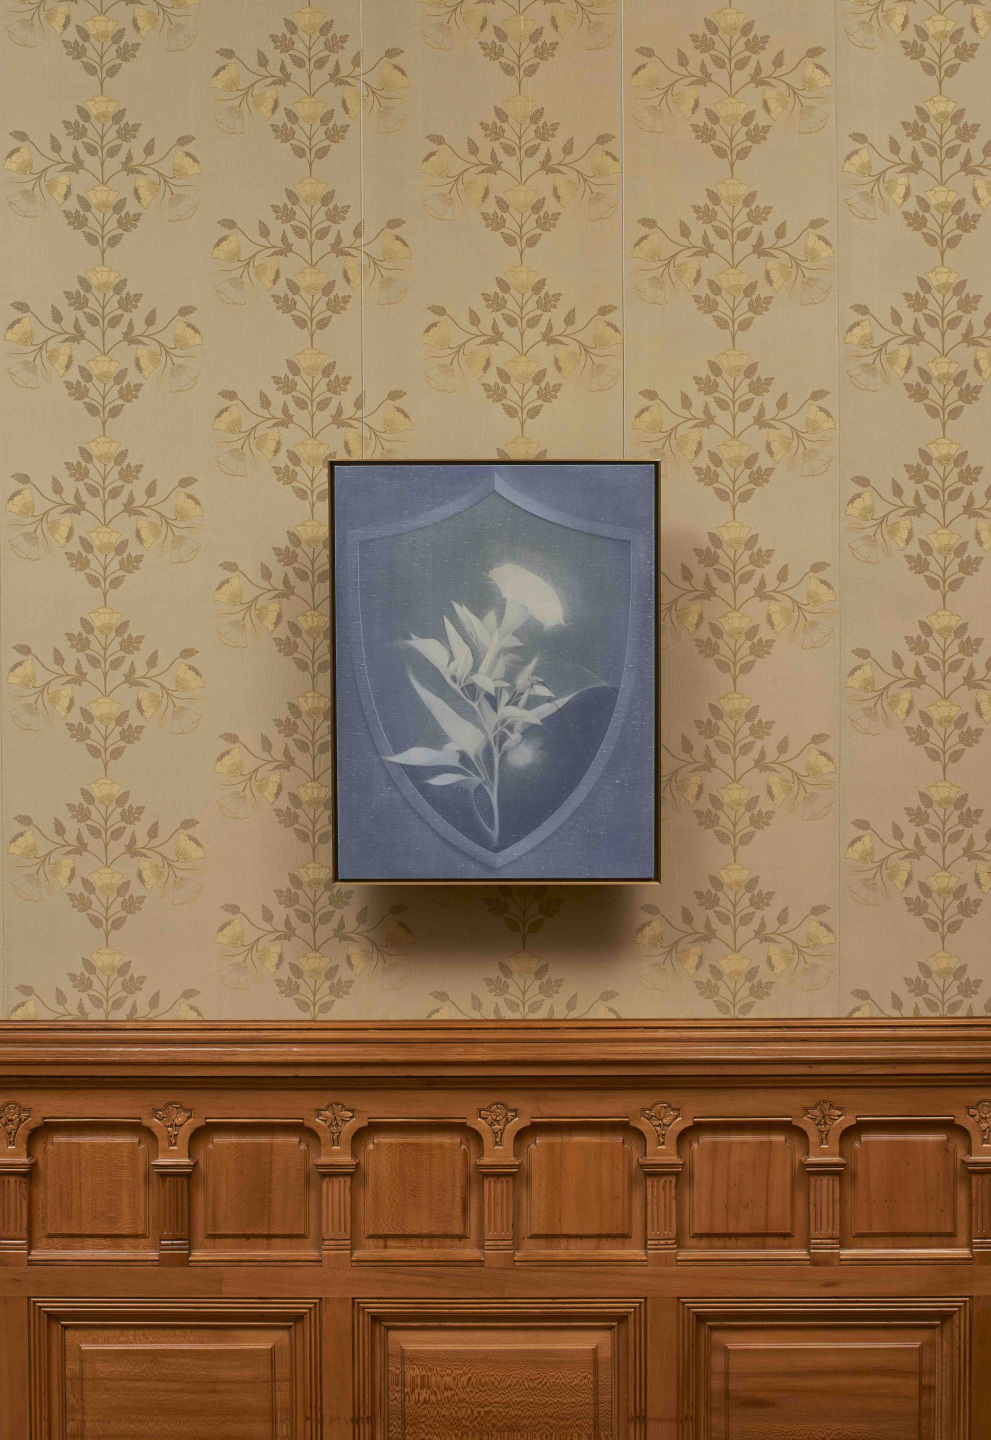 painting of plants on wall theodora allen